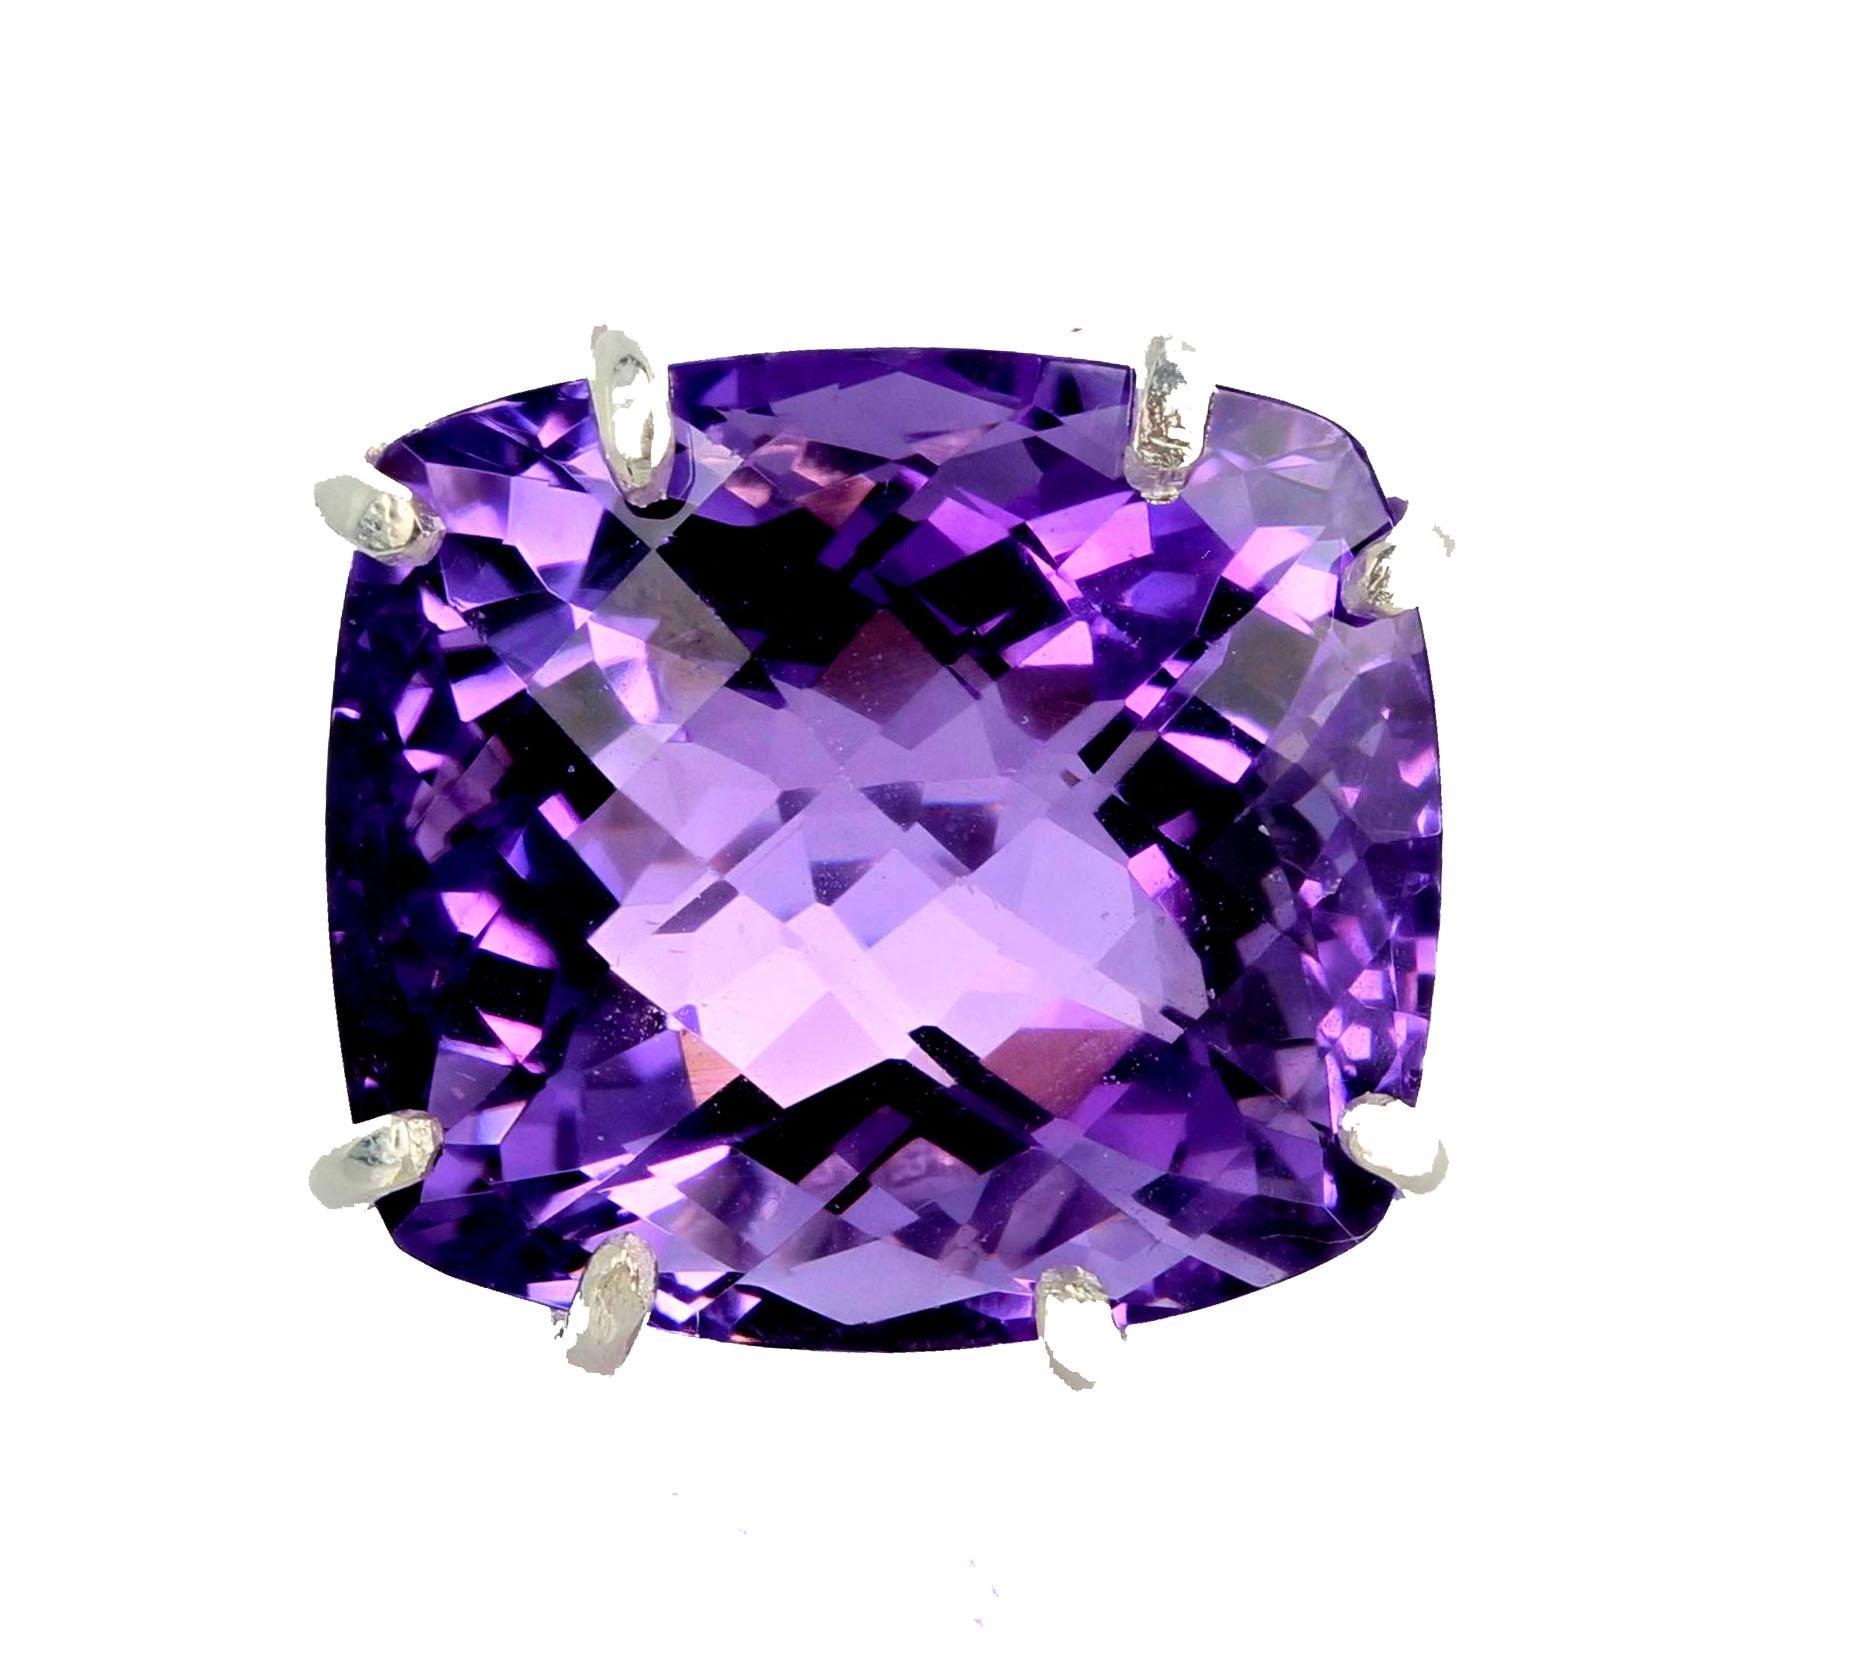 The ultimate red carpet ring for every occasion.  You will be amazed by the huge generous size of this checkerboard cushion cut 44 Ct. pinky purple show stopper solitaire.  This 22mm x 20mm sterling silver ring design sets the gemstone high up on